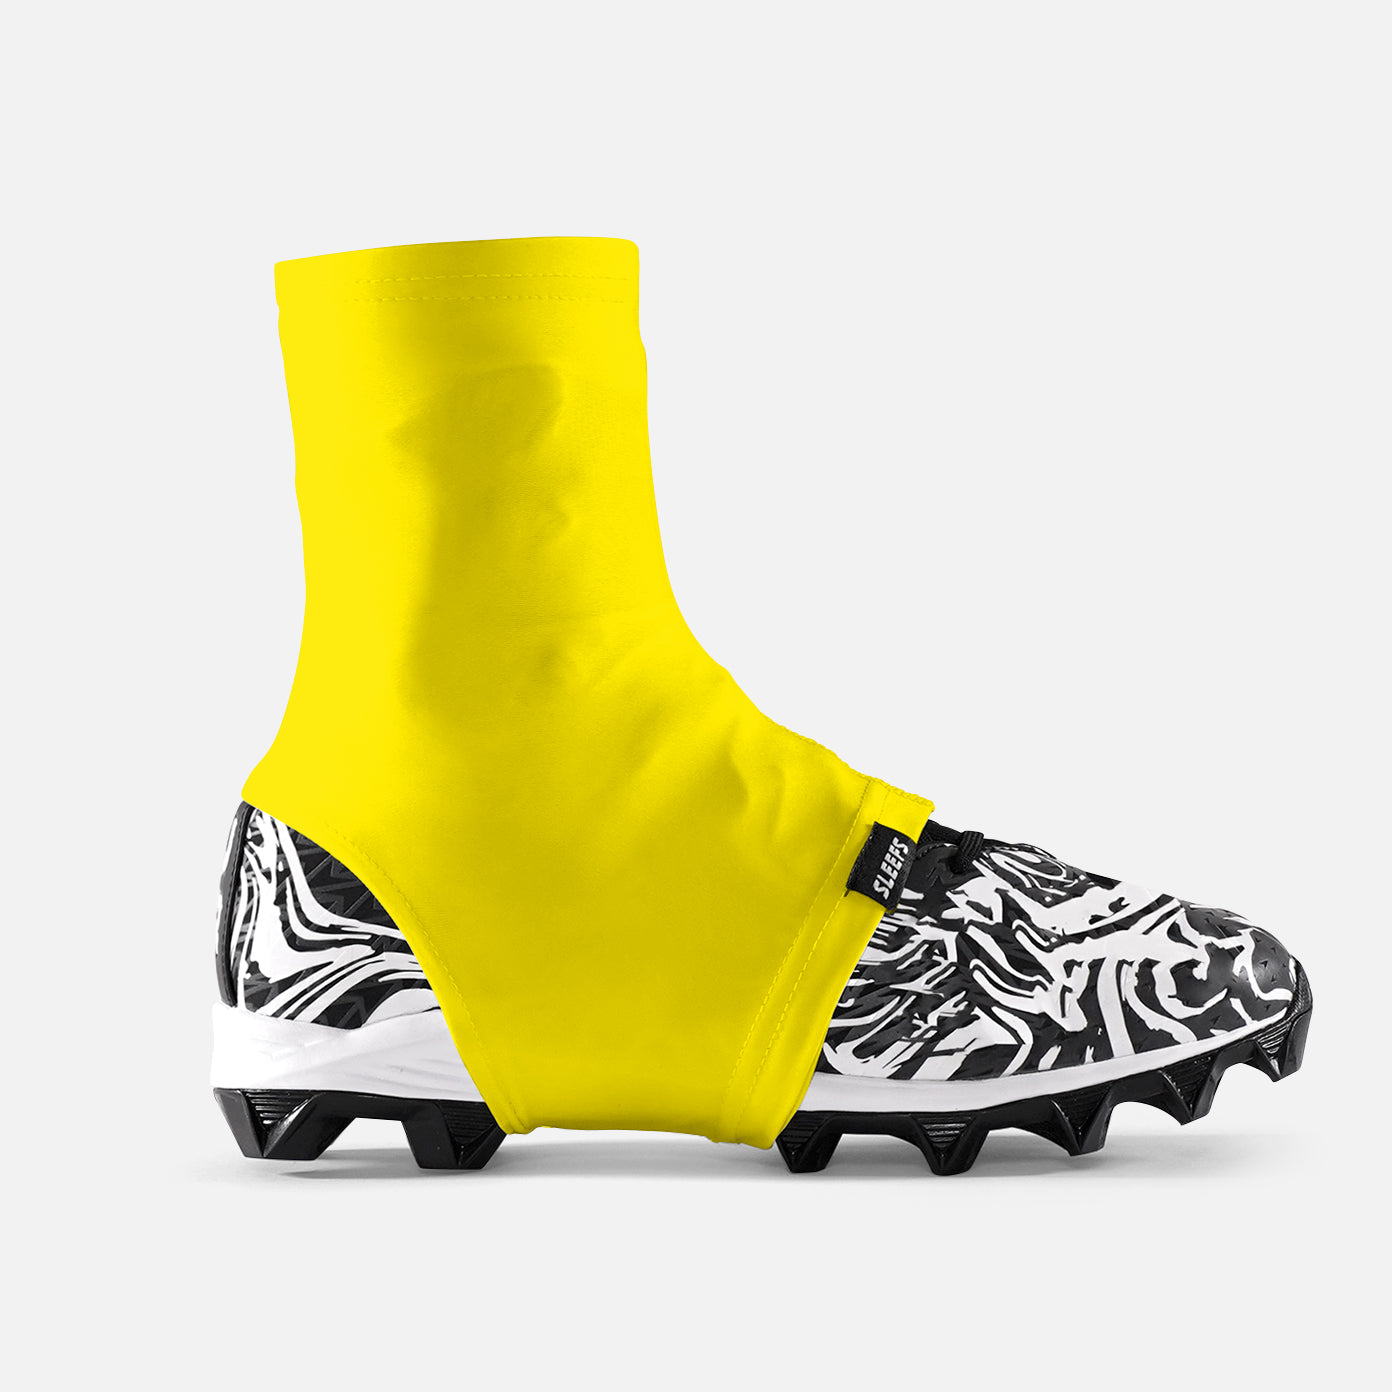 Hue Yellow Kids Spats / Cleat Covers – SLEEFS